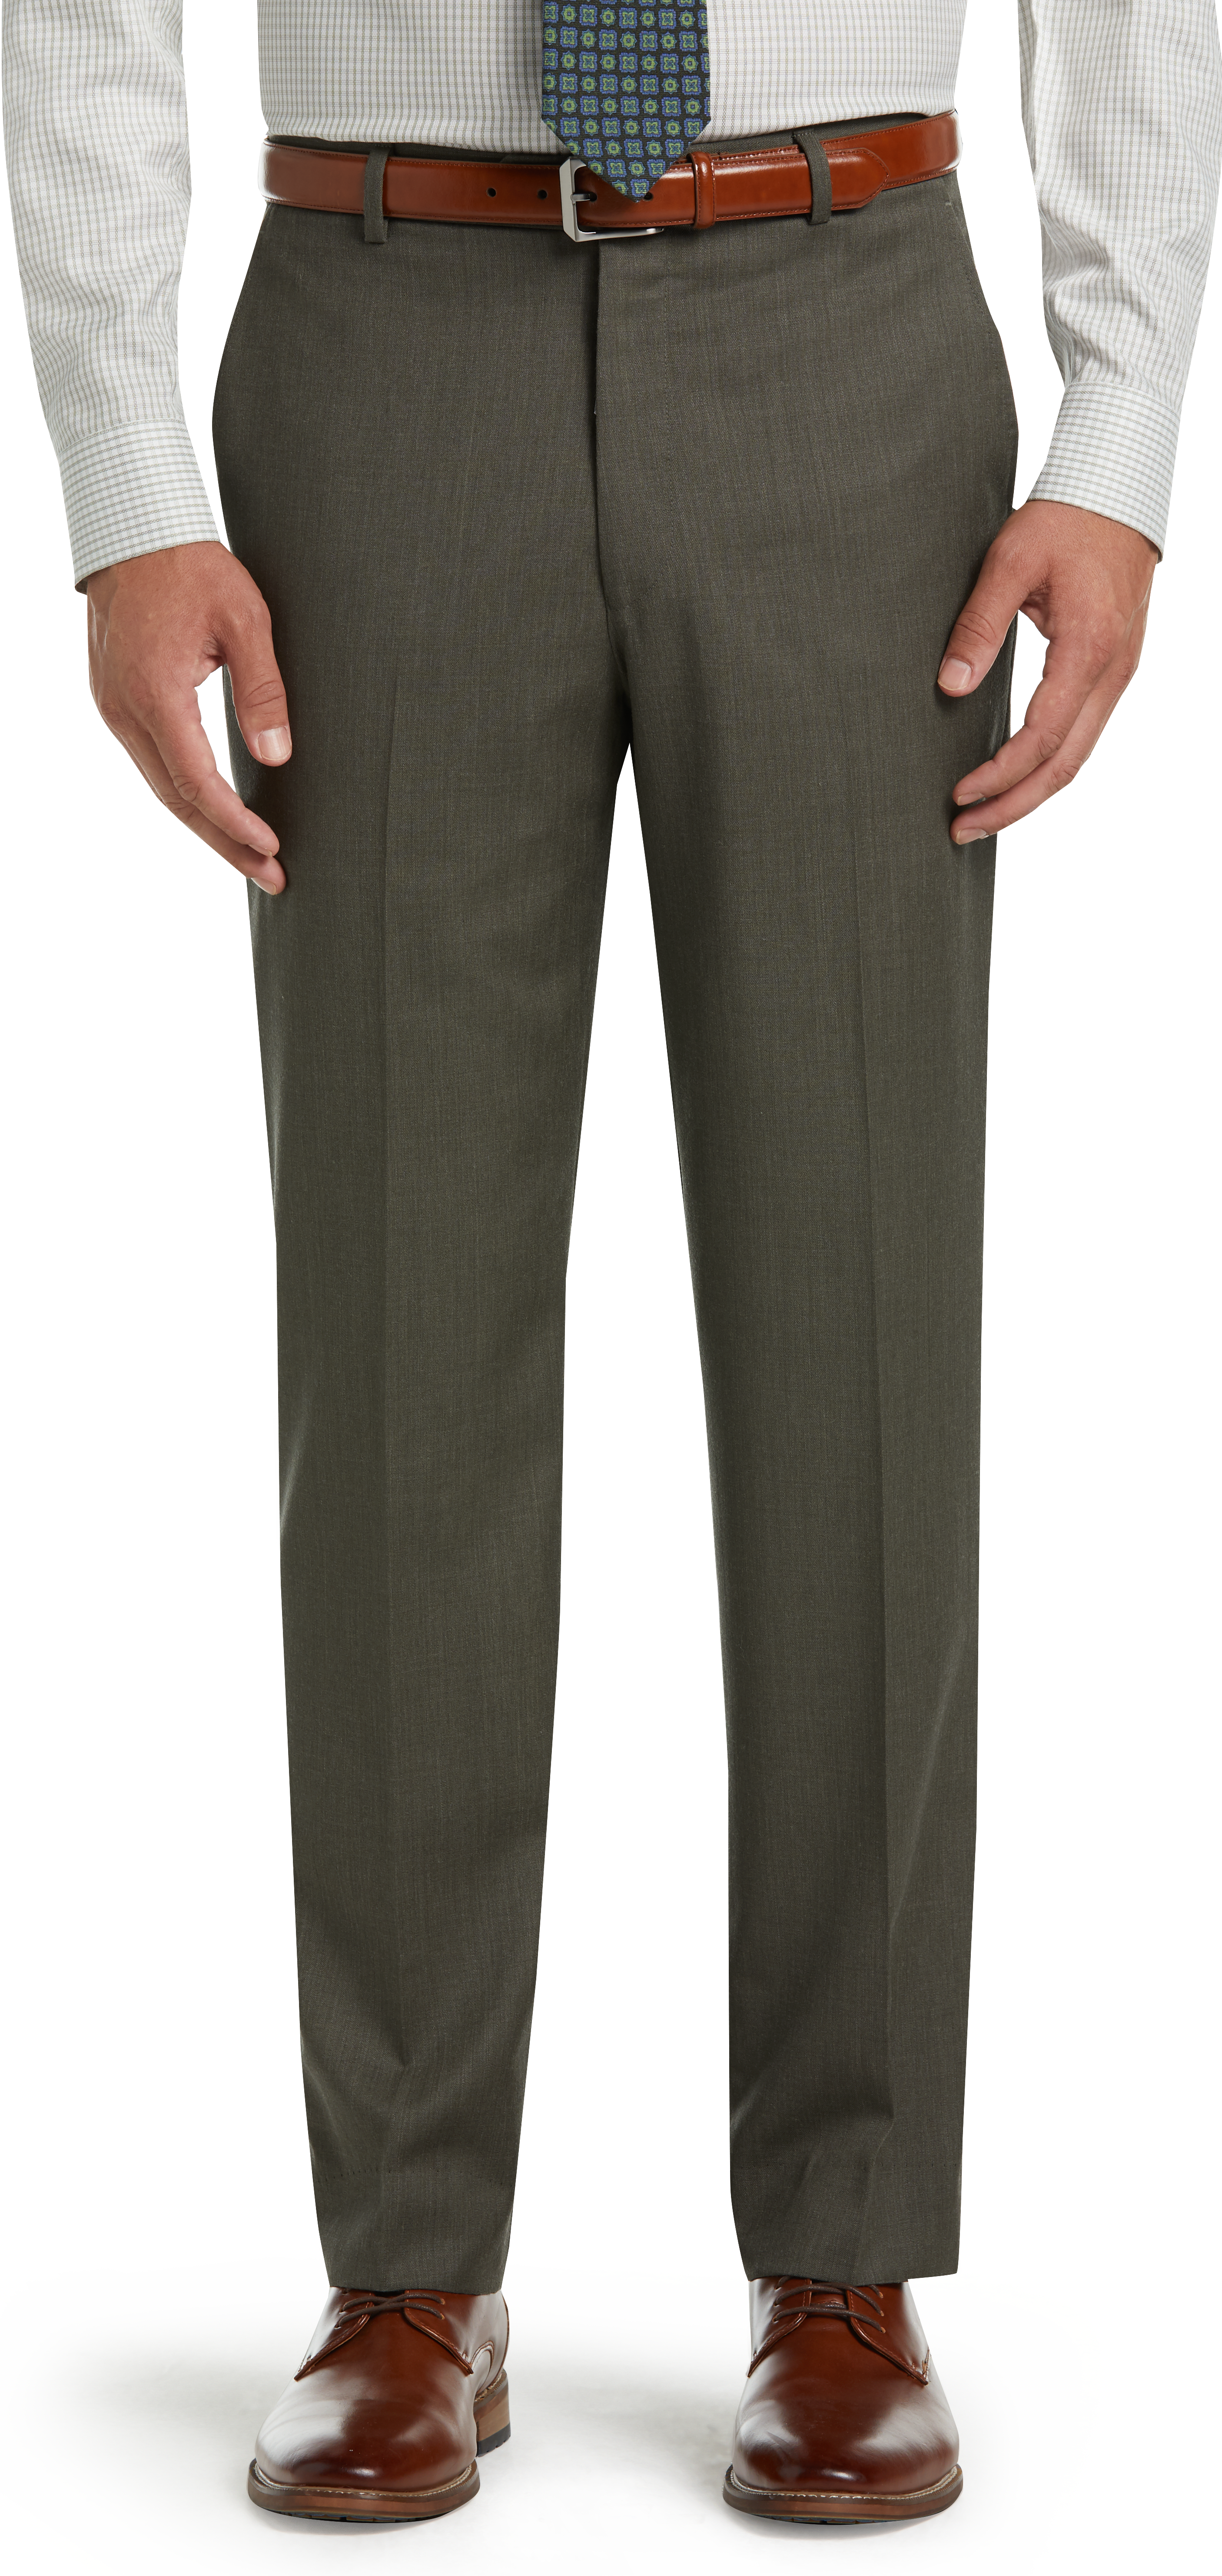 Executive Collection Tailored Fit Flat Front Dress Pants - Big & Tall ...